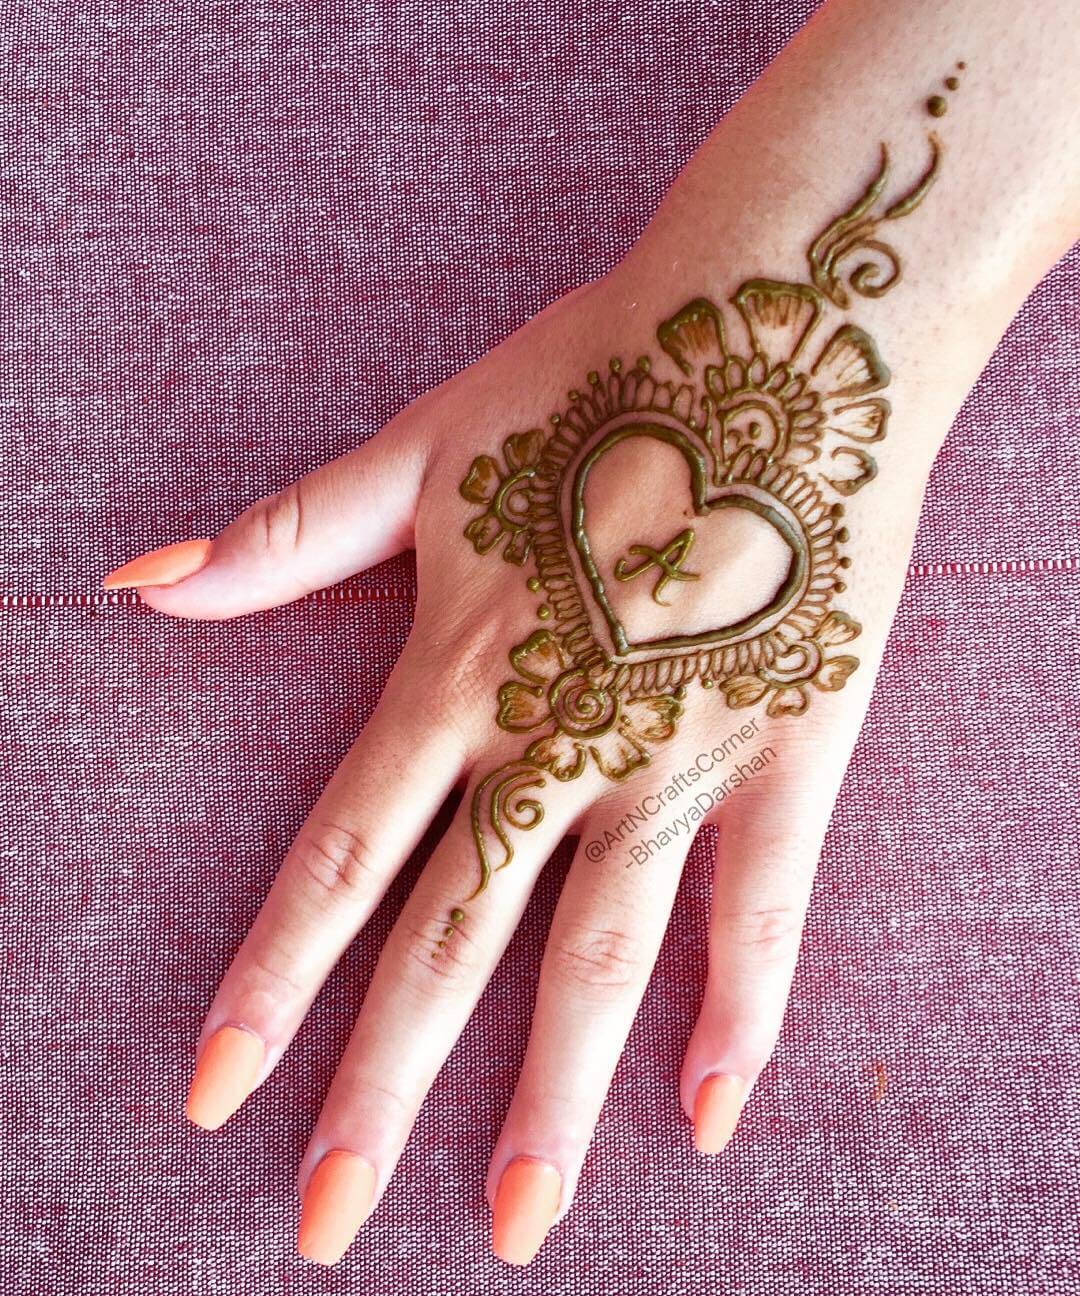 Cute heart mehndi heart design for back of the palm